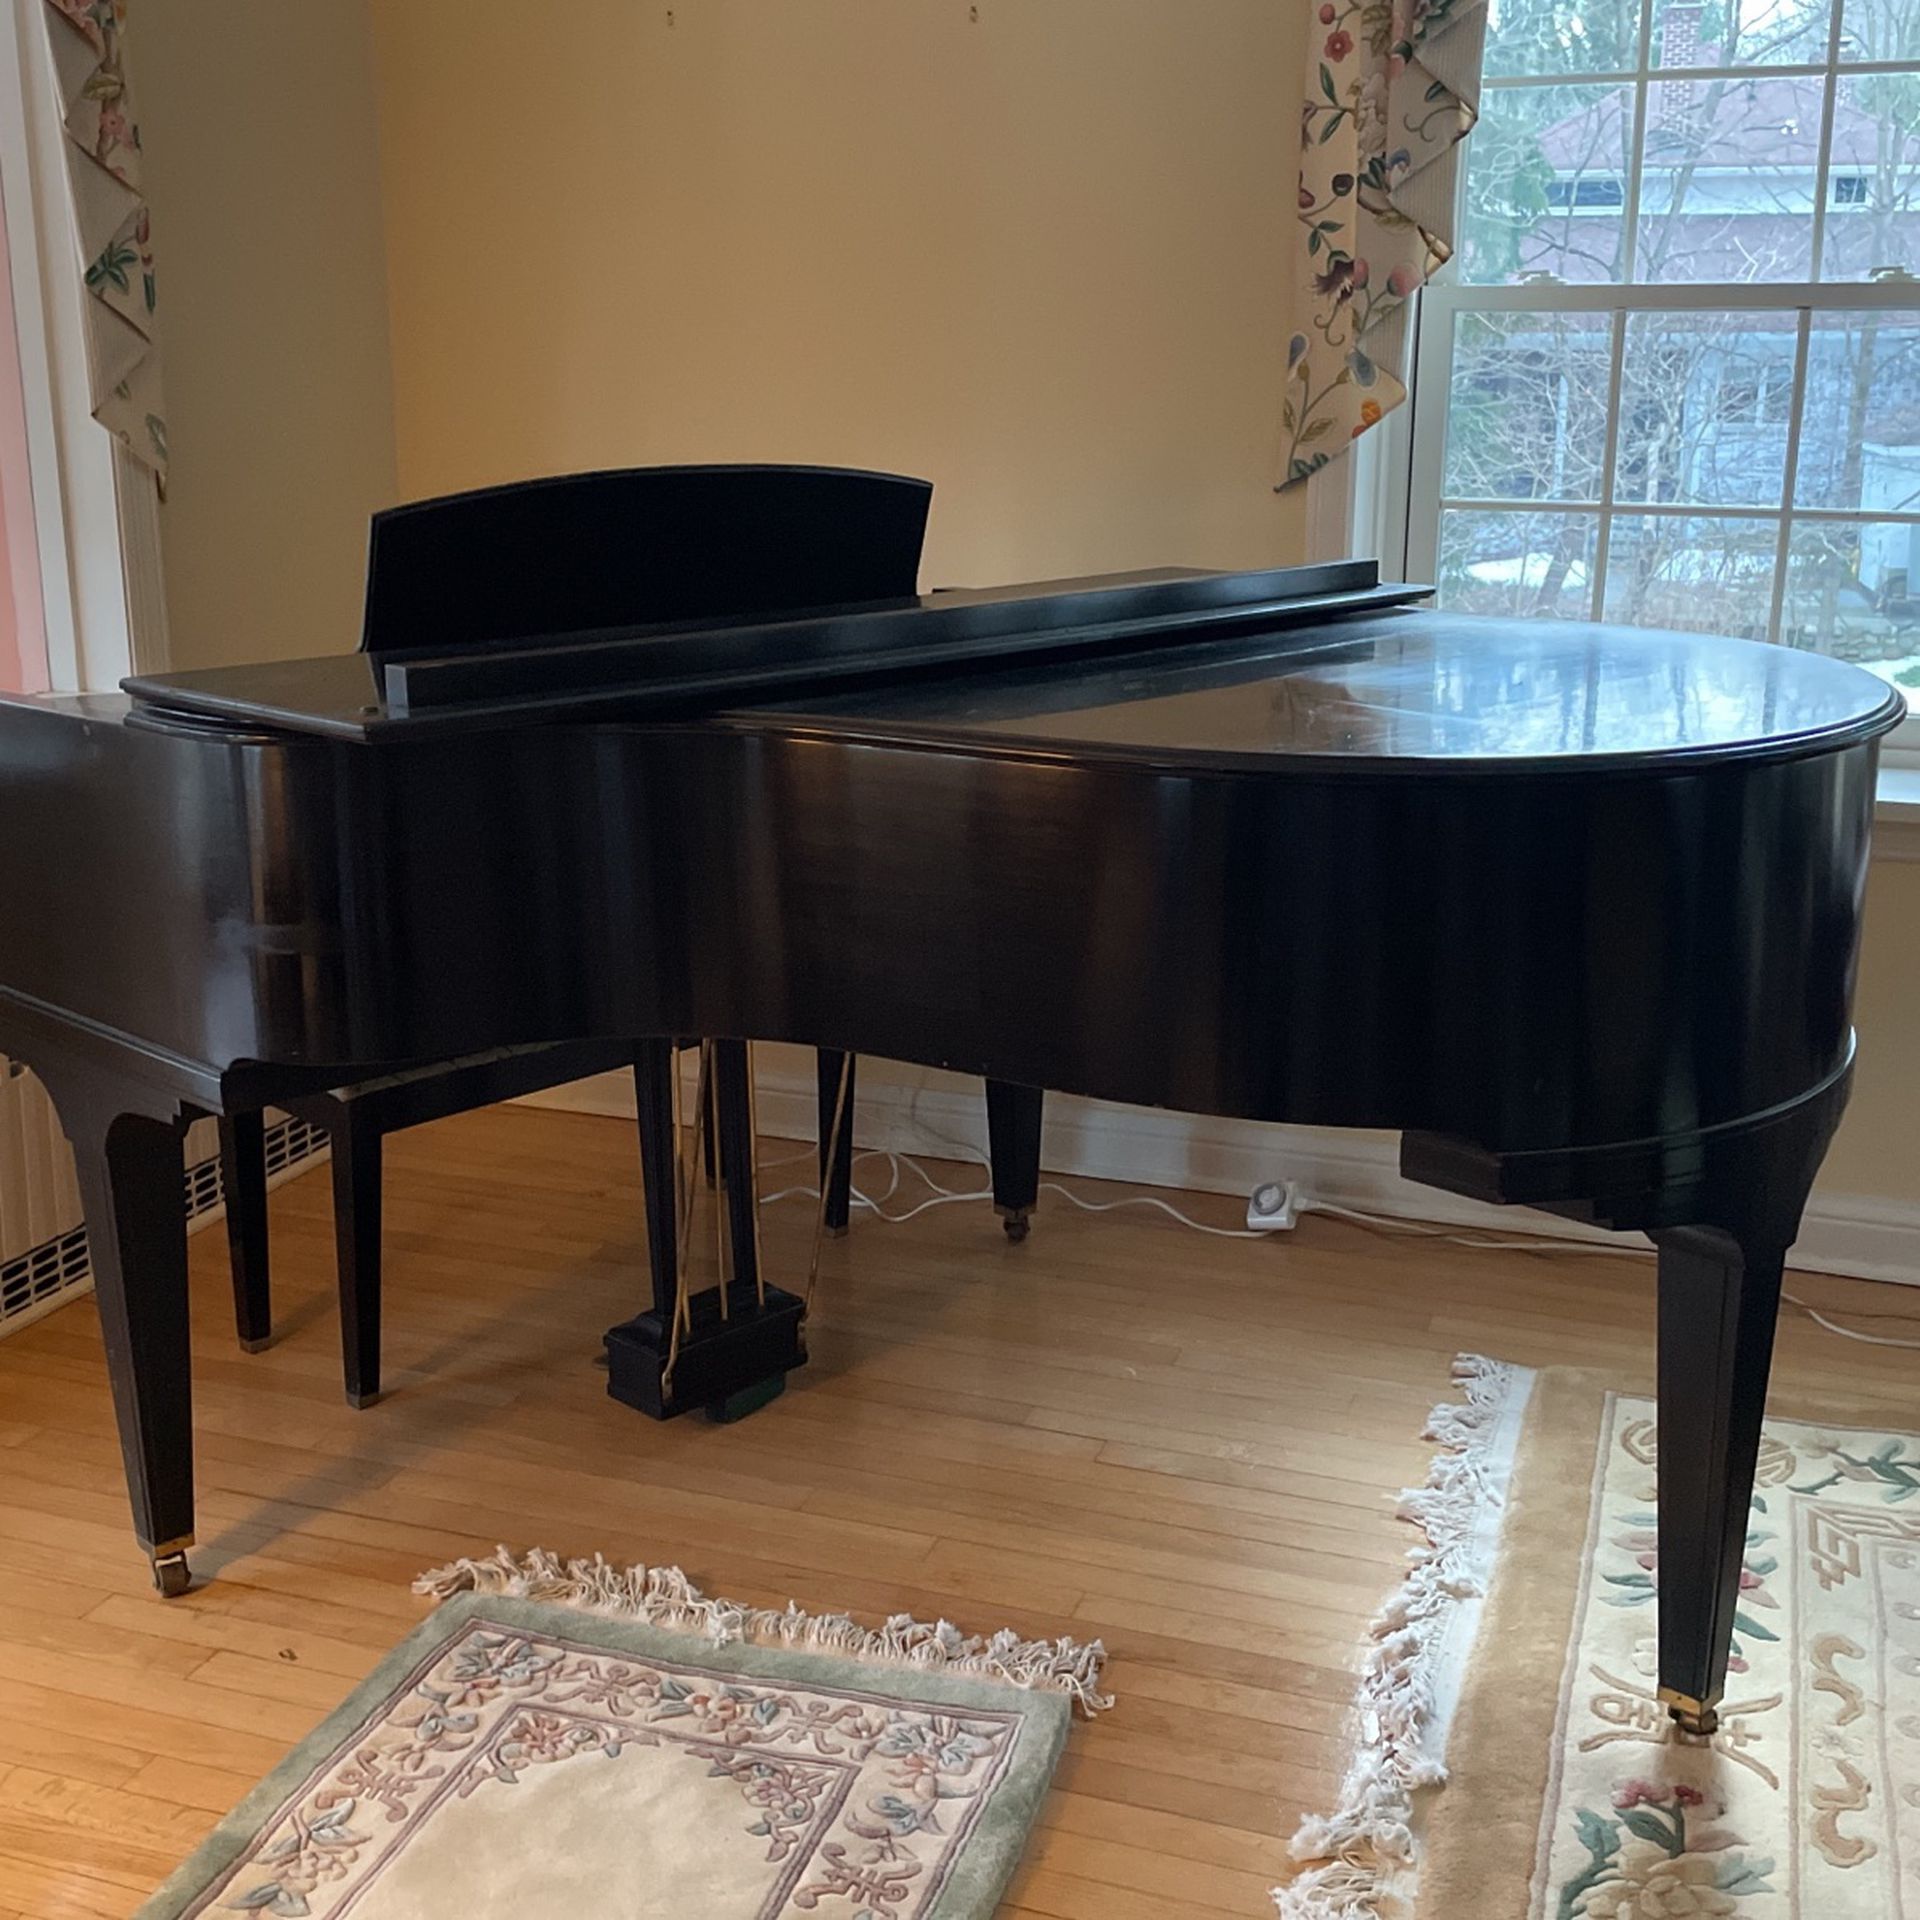 Non-Functioning Piano